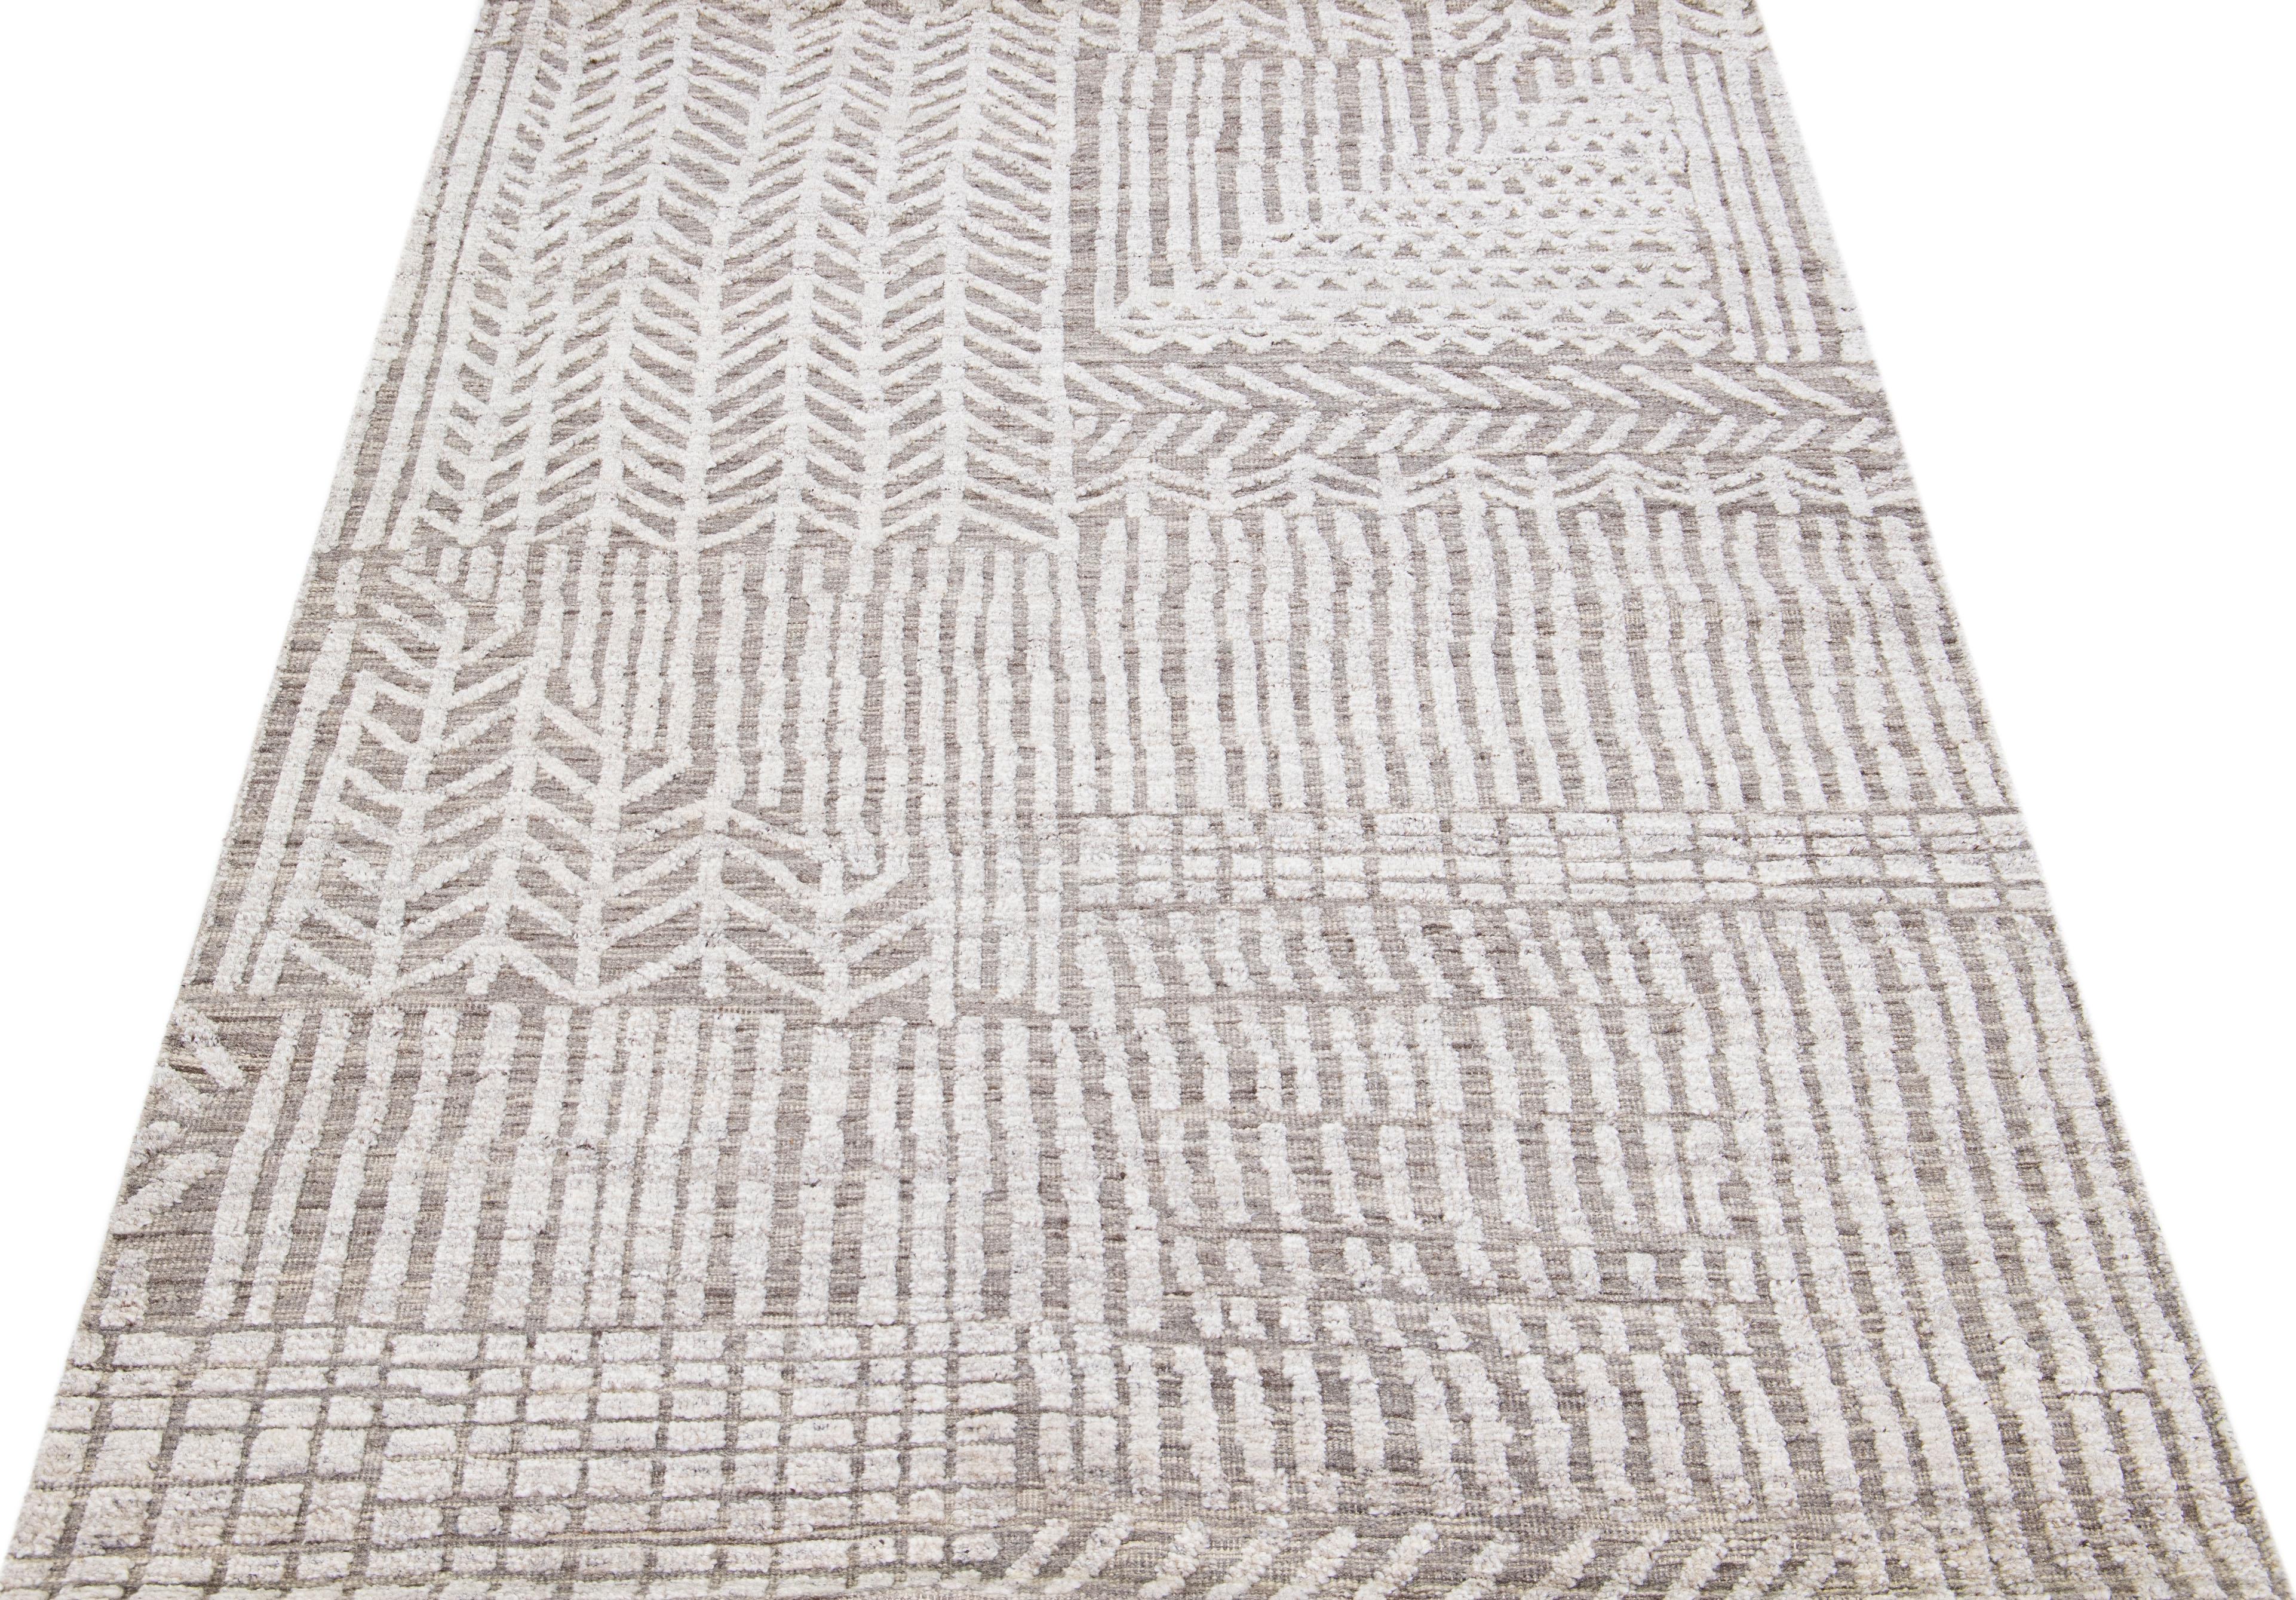 Beautiful modern Moroccan-style hand-knotted wool rug with a light gray color field. This rug is part of our Apadana's Safi Collection and features an abstract geometric design in beige.

This rug measures: 5'2